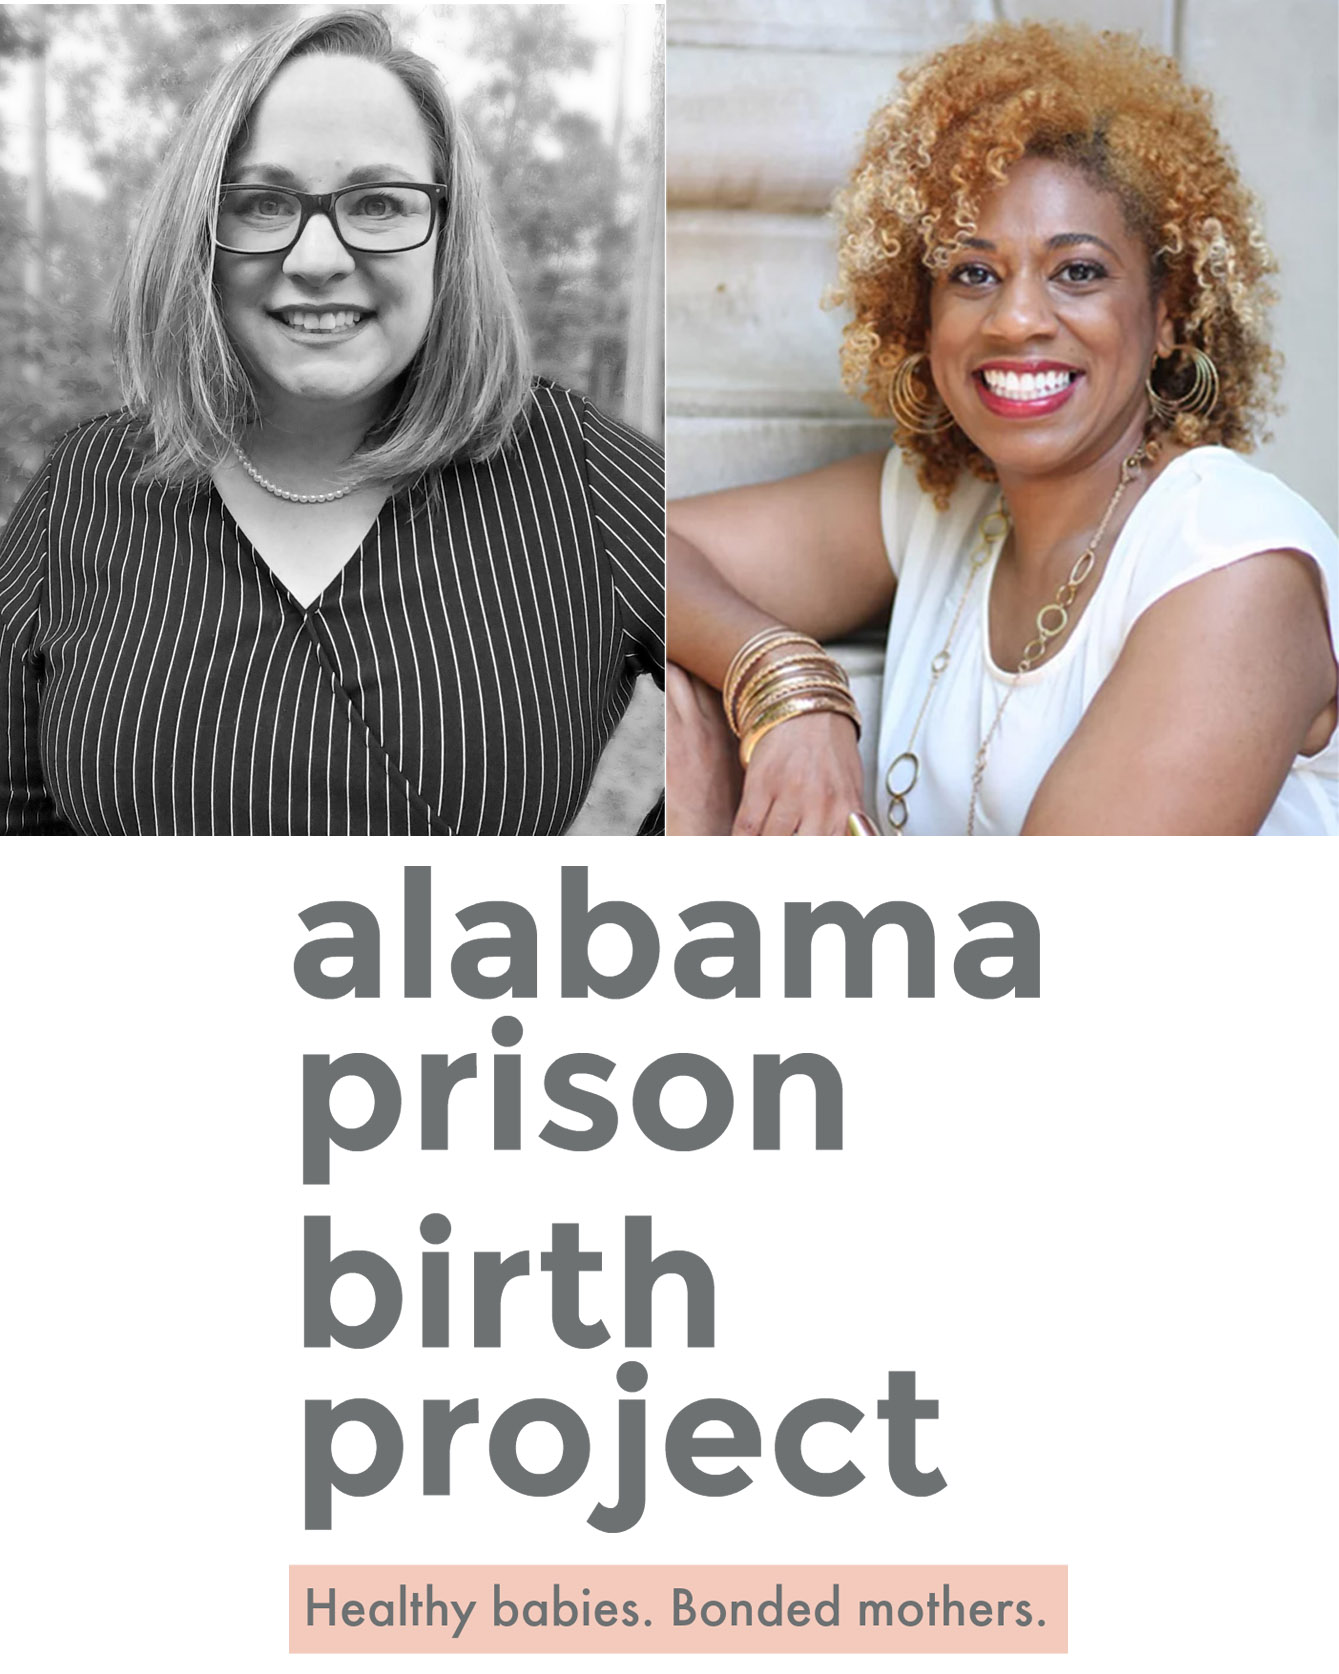 Ashley Lovell and Chauntel Norris, Alabama Prison Birth Project collage